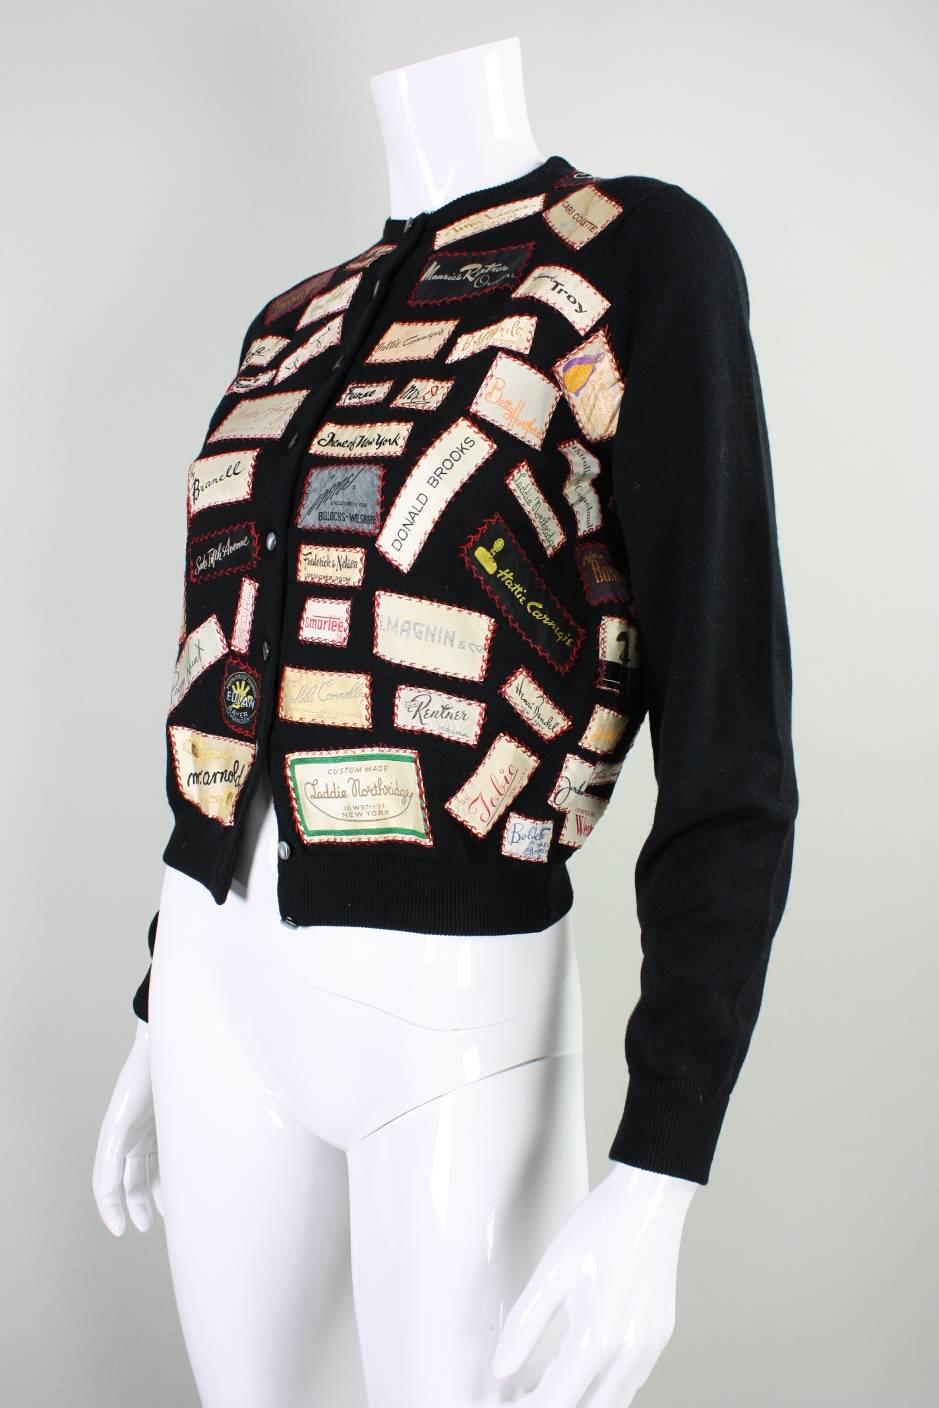 Women's 1960's One of a Kind Appliqued Label Sweater